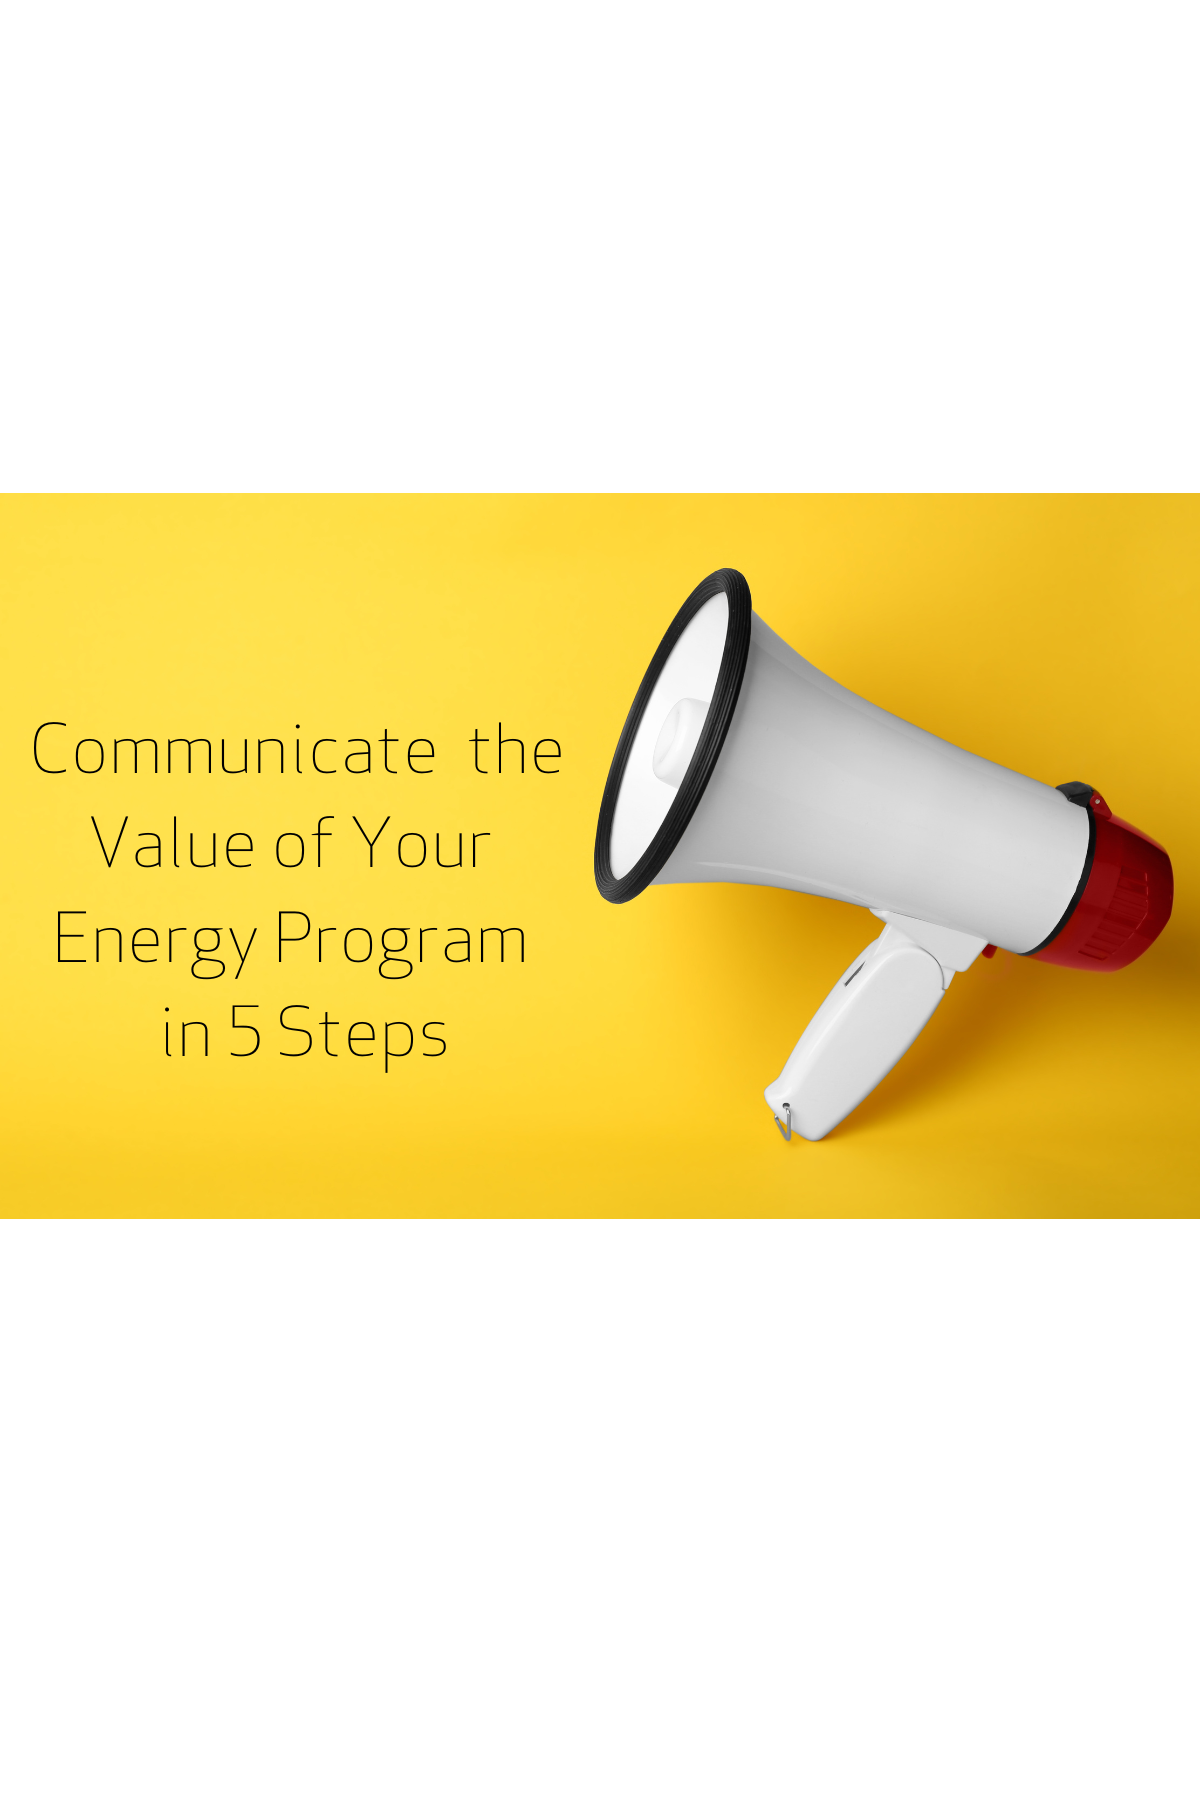 A quick checklist to effectively communicate the importance of a corporate energy program to peers and management.